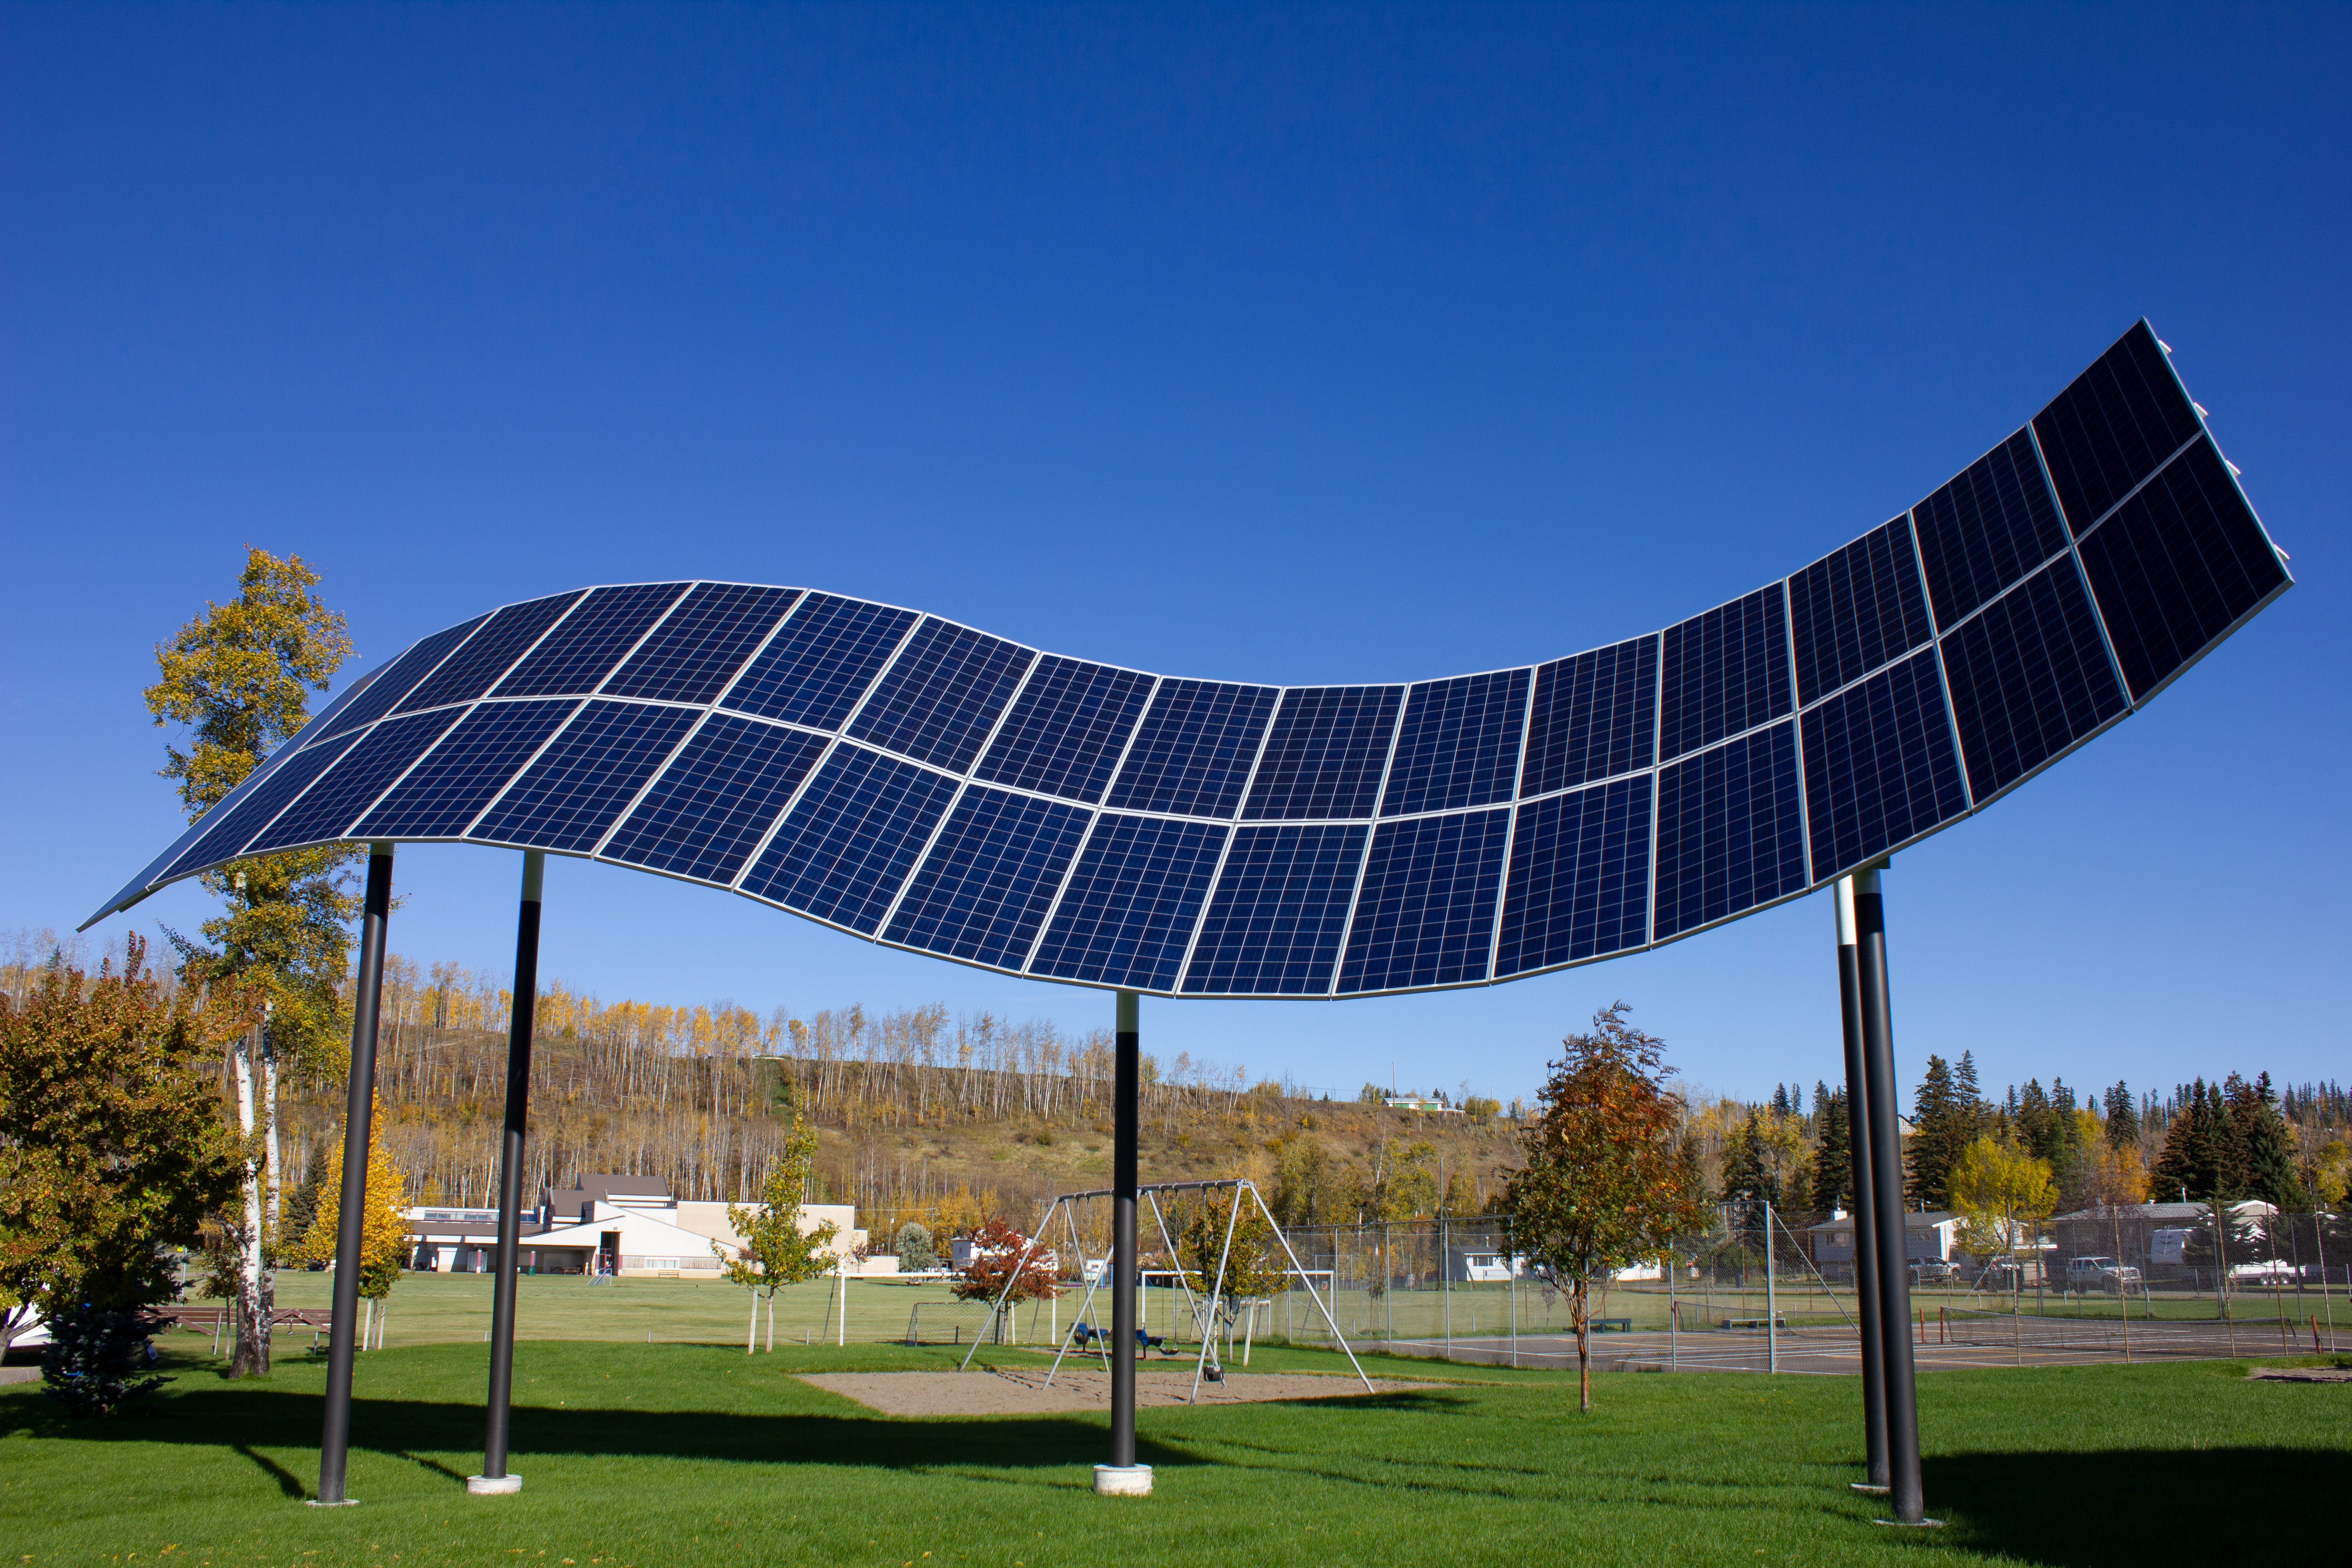 Hudson Hope, B.C.’s community solar initiative installed solar panels on the district’s community pool building.